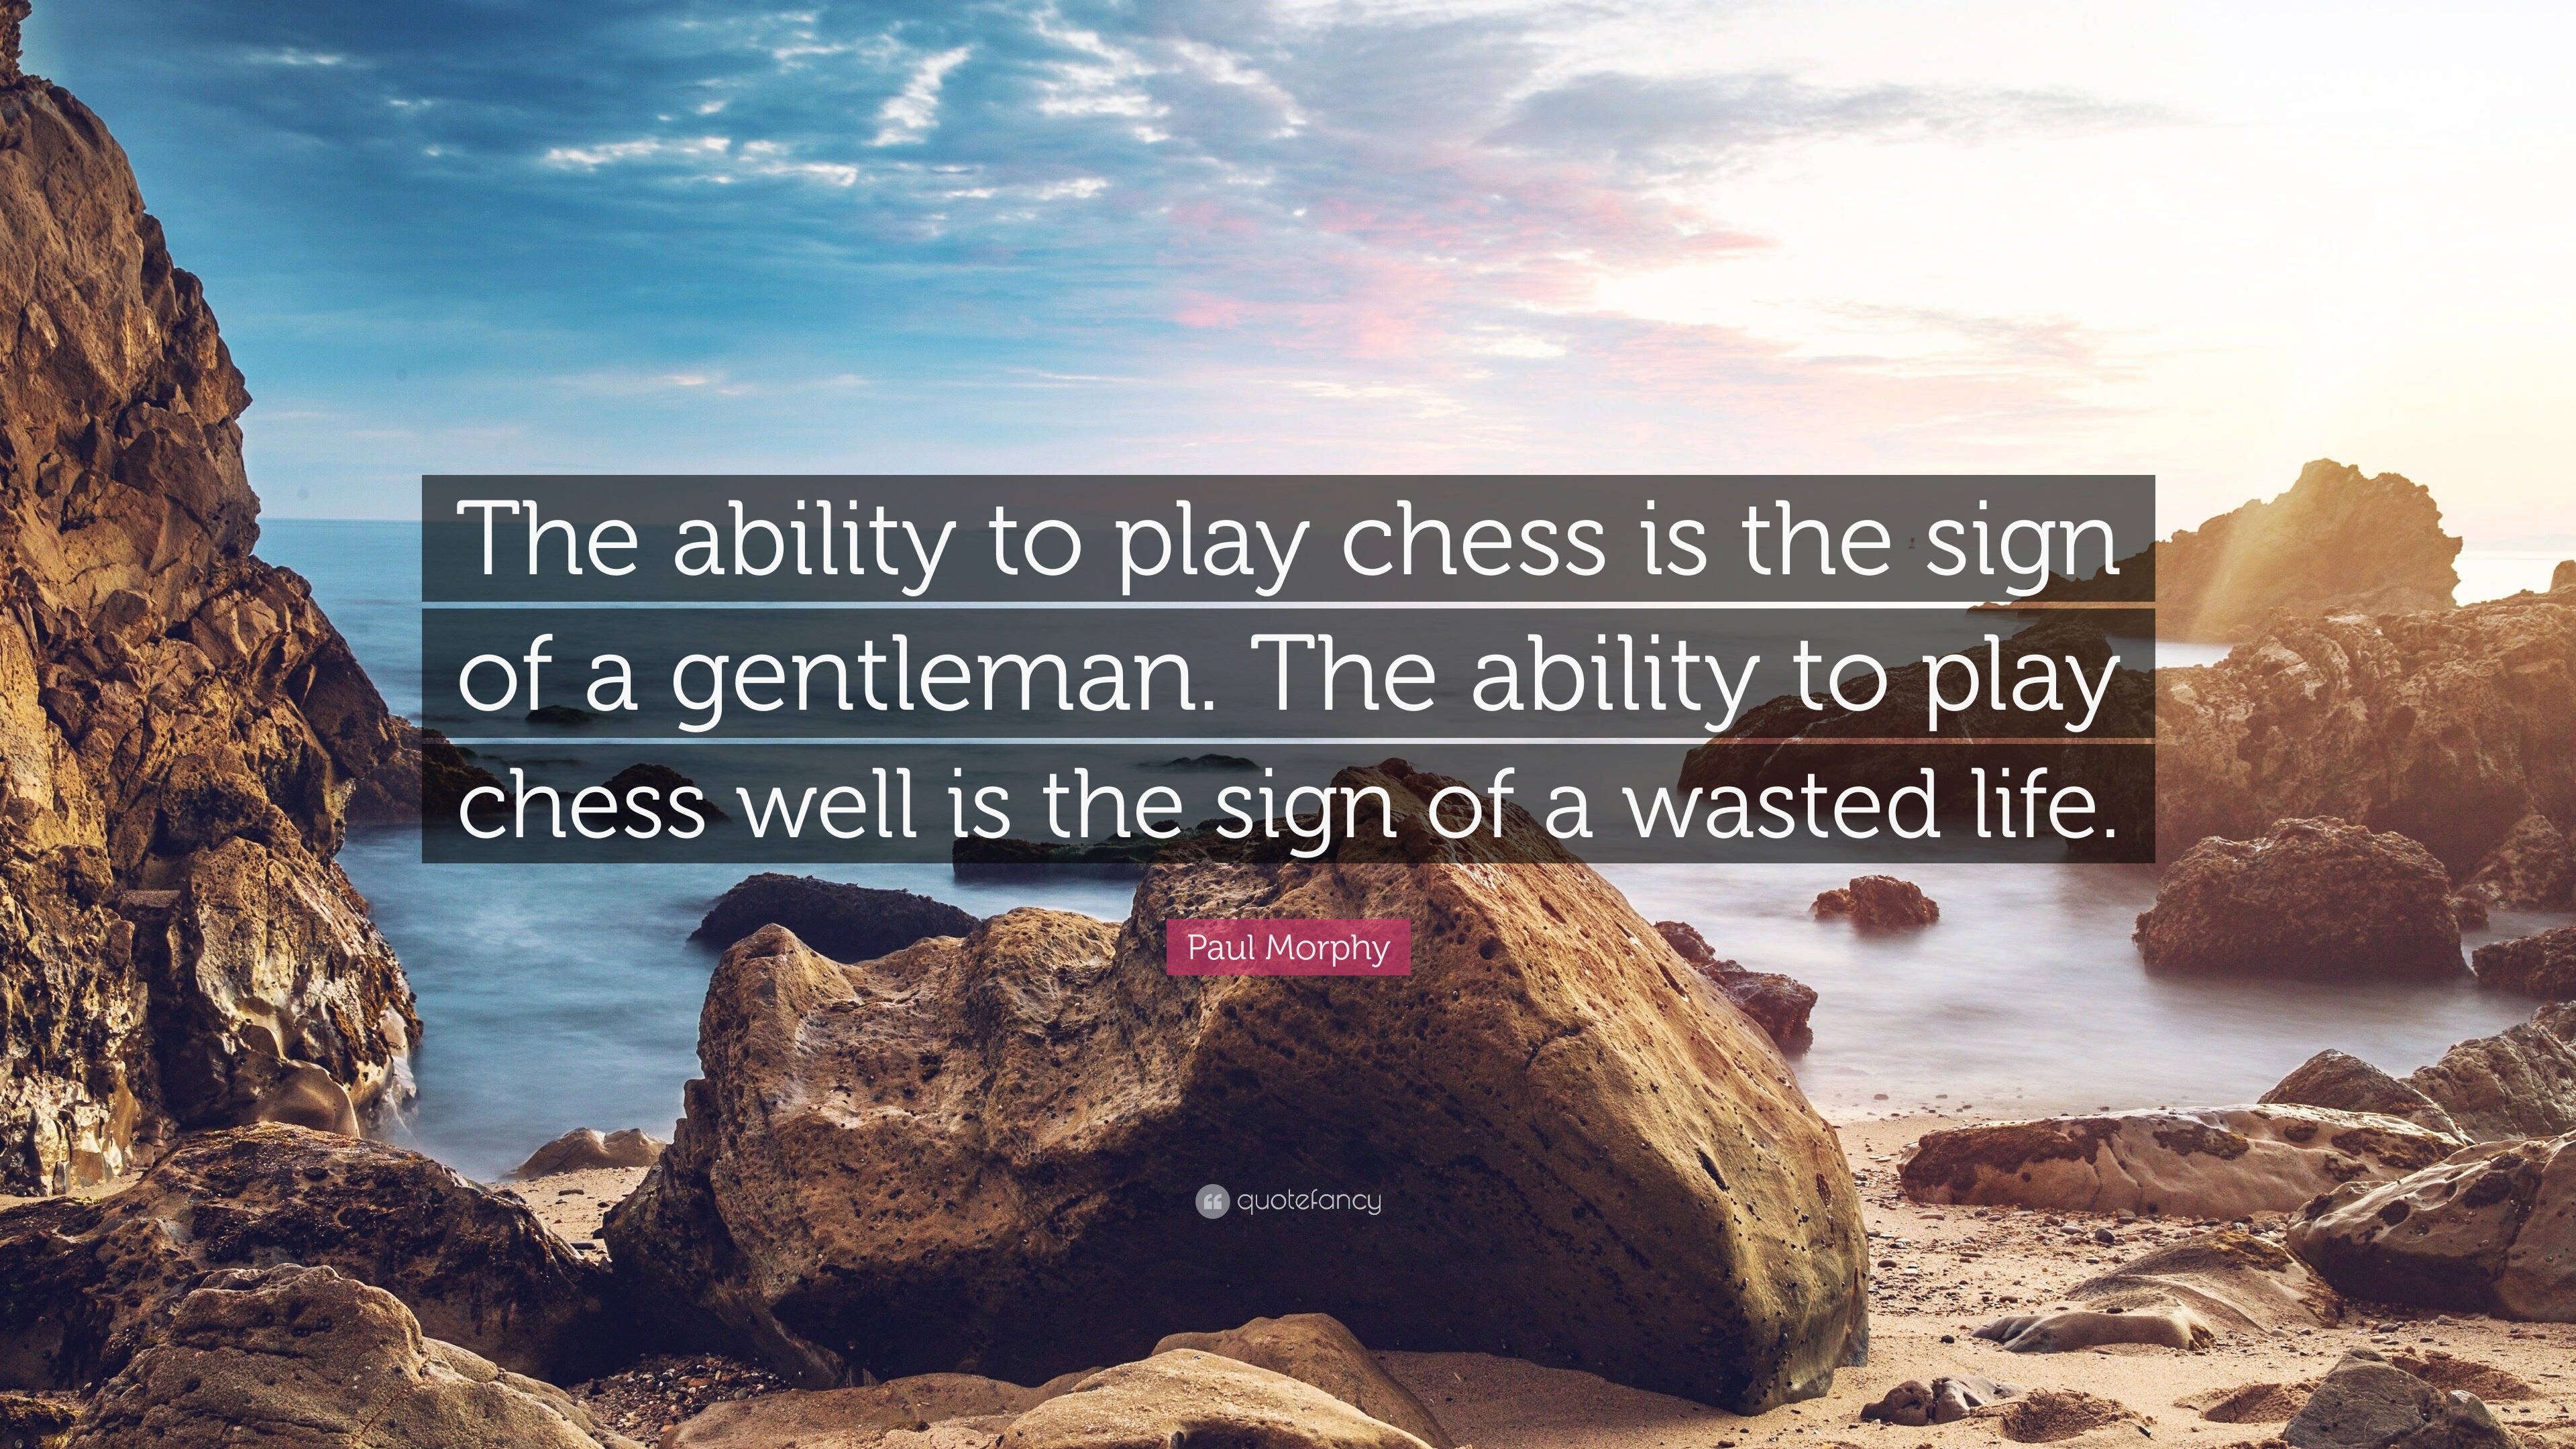 If you play the london I have very choice words.. #chess #chesstok